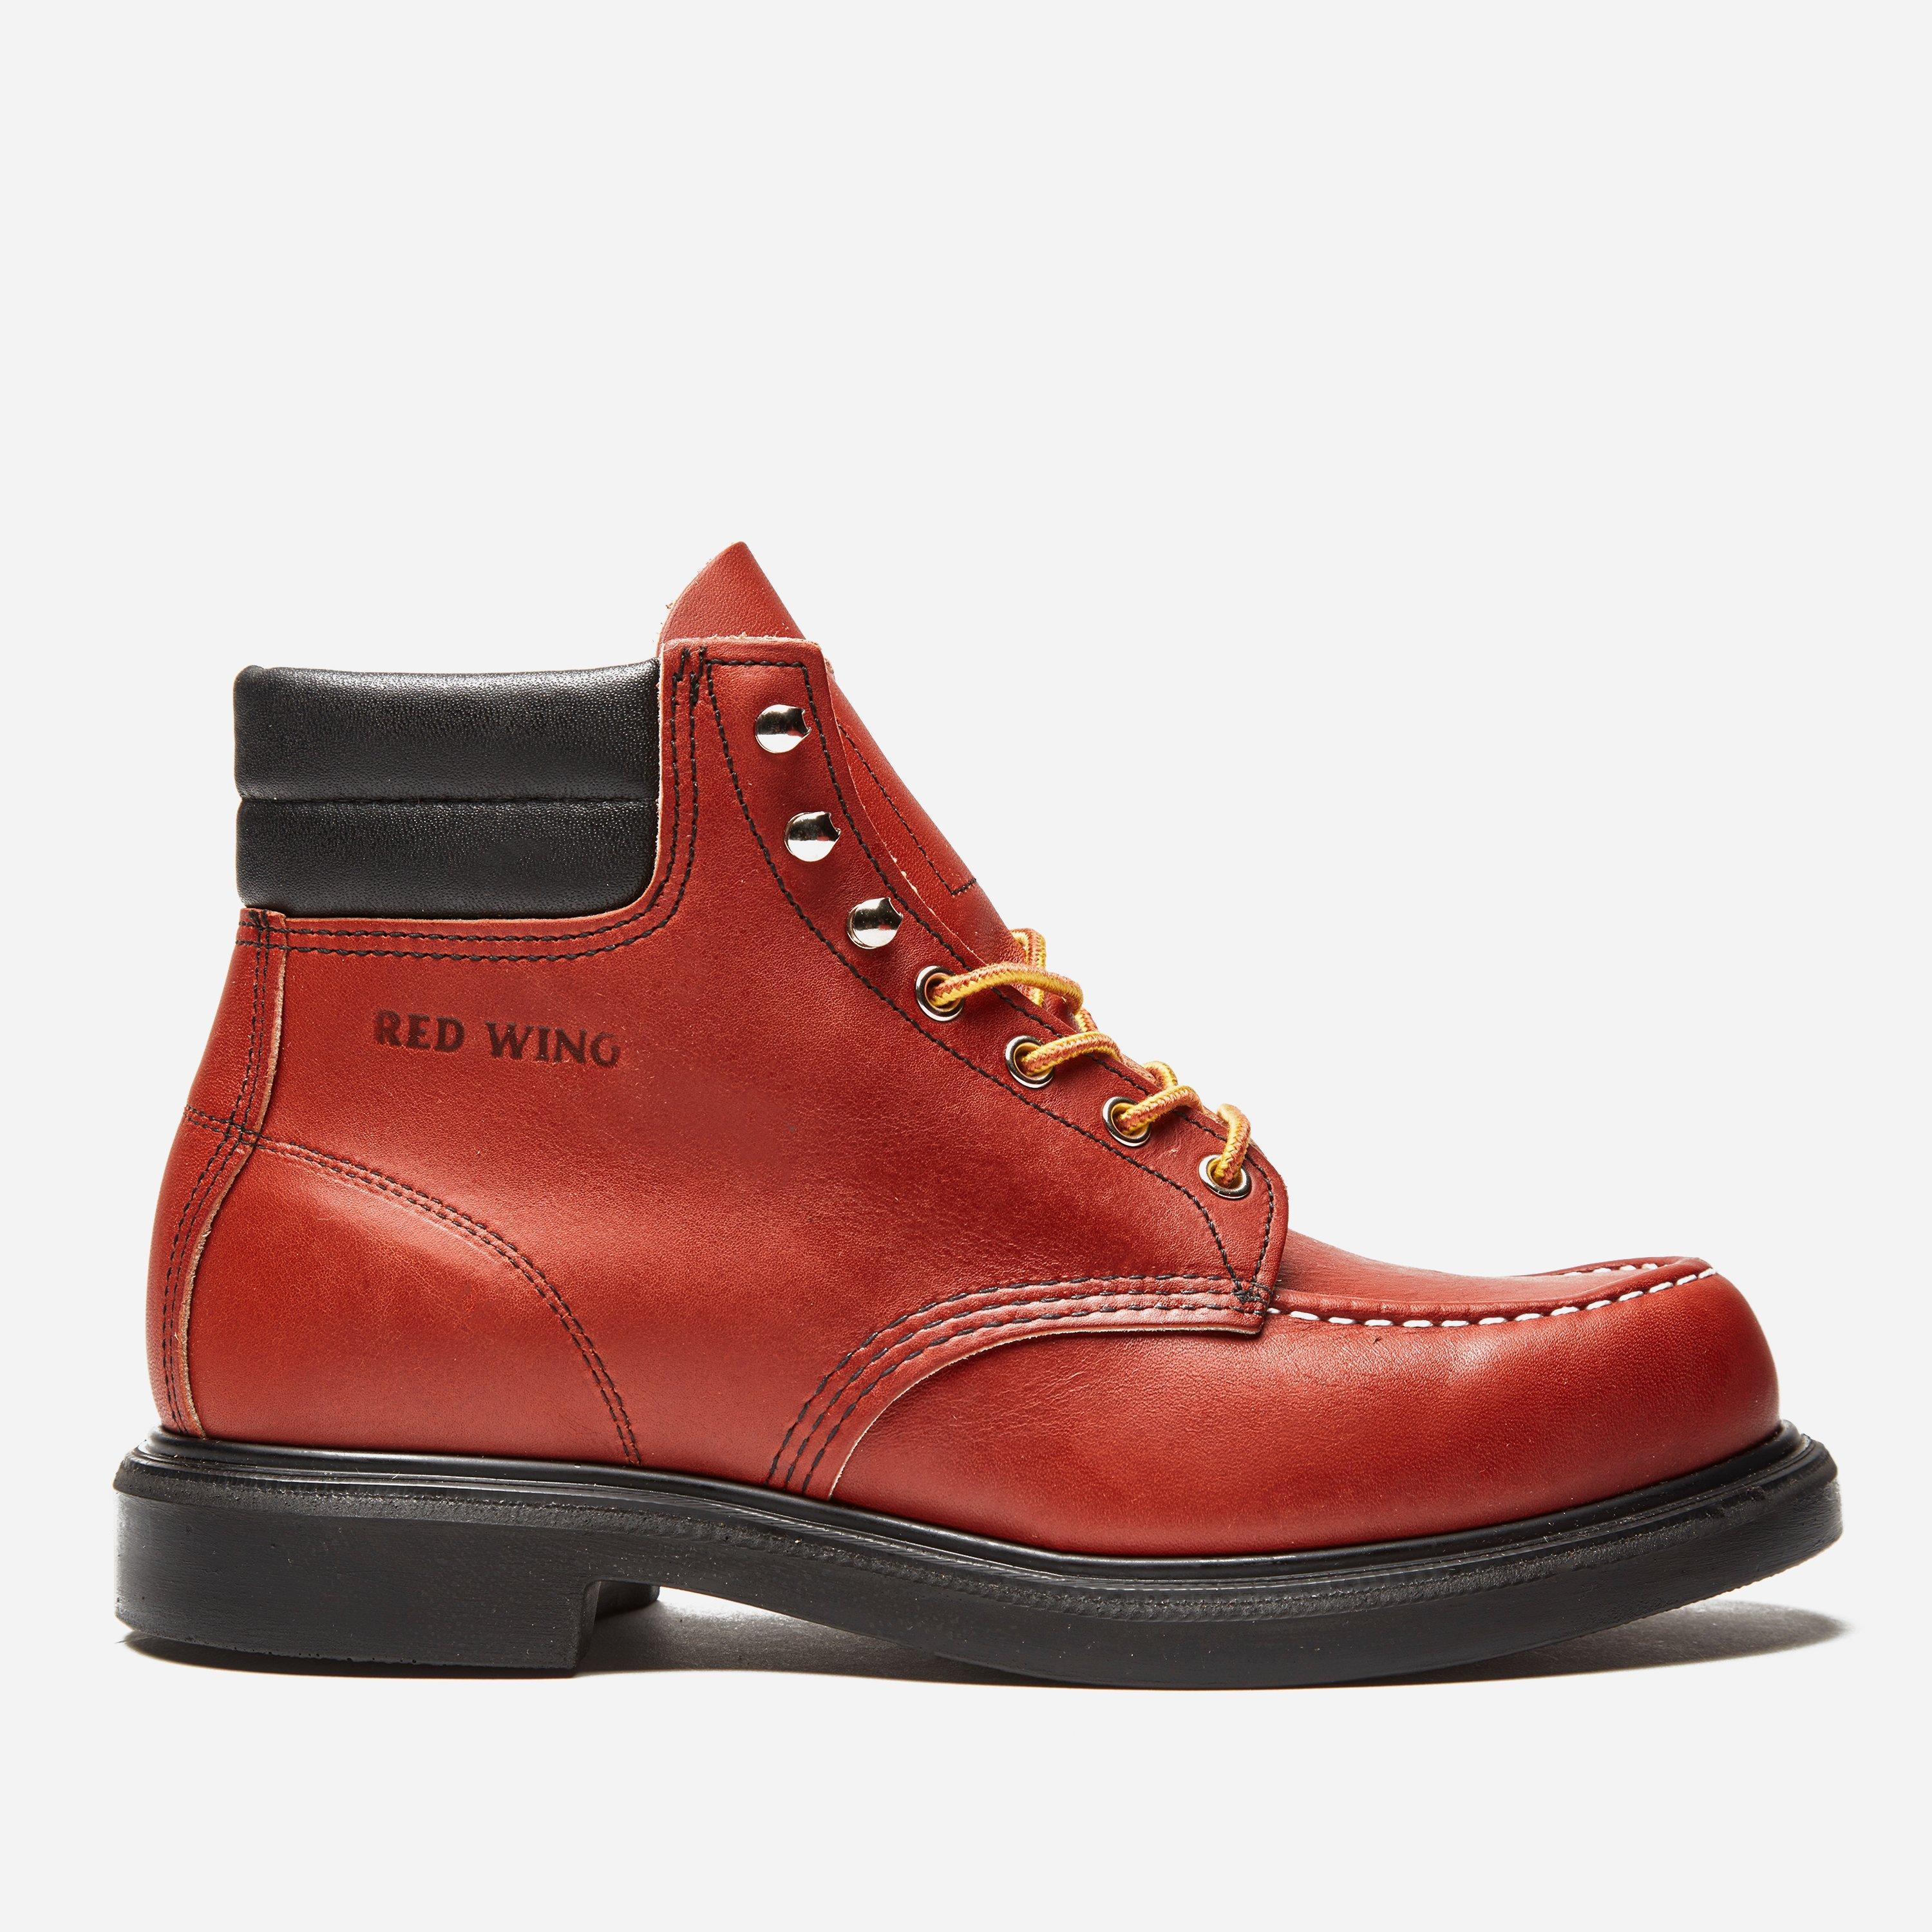 Red Wing Leather Classic Moc Supersole Boot in Red for Men - Lyst